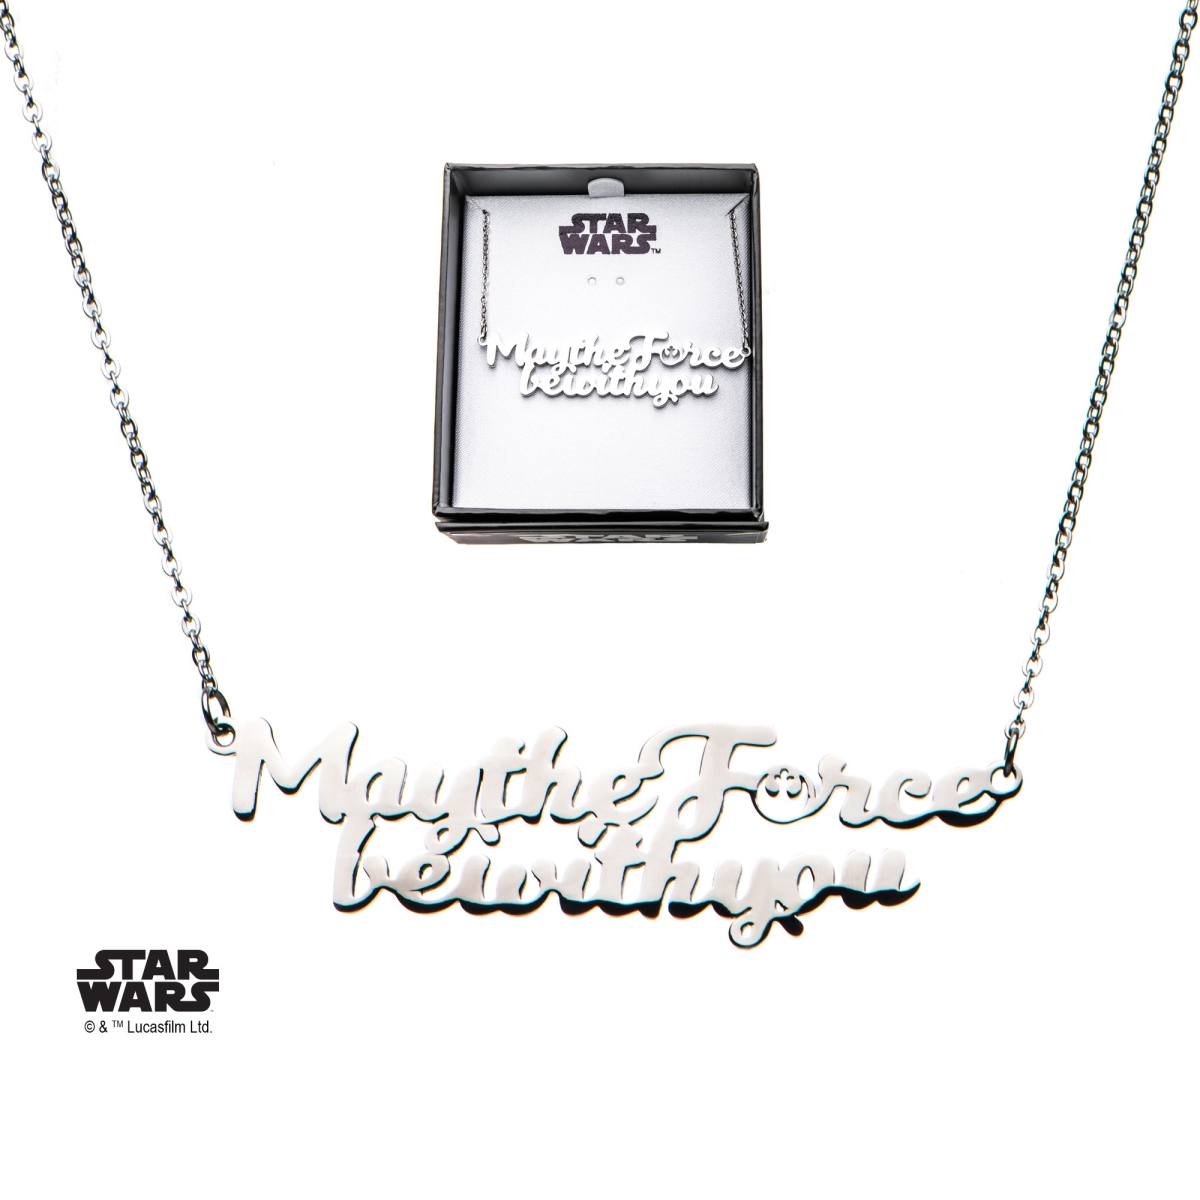 Swmtfbwynk01 Necklace - May The Force Be With You, Stainless Steel